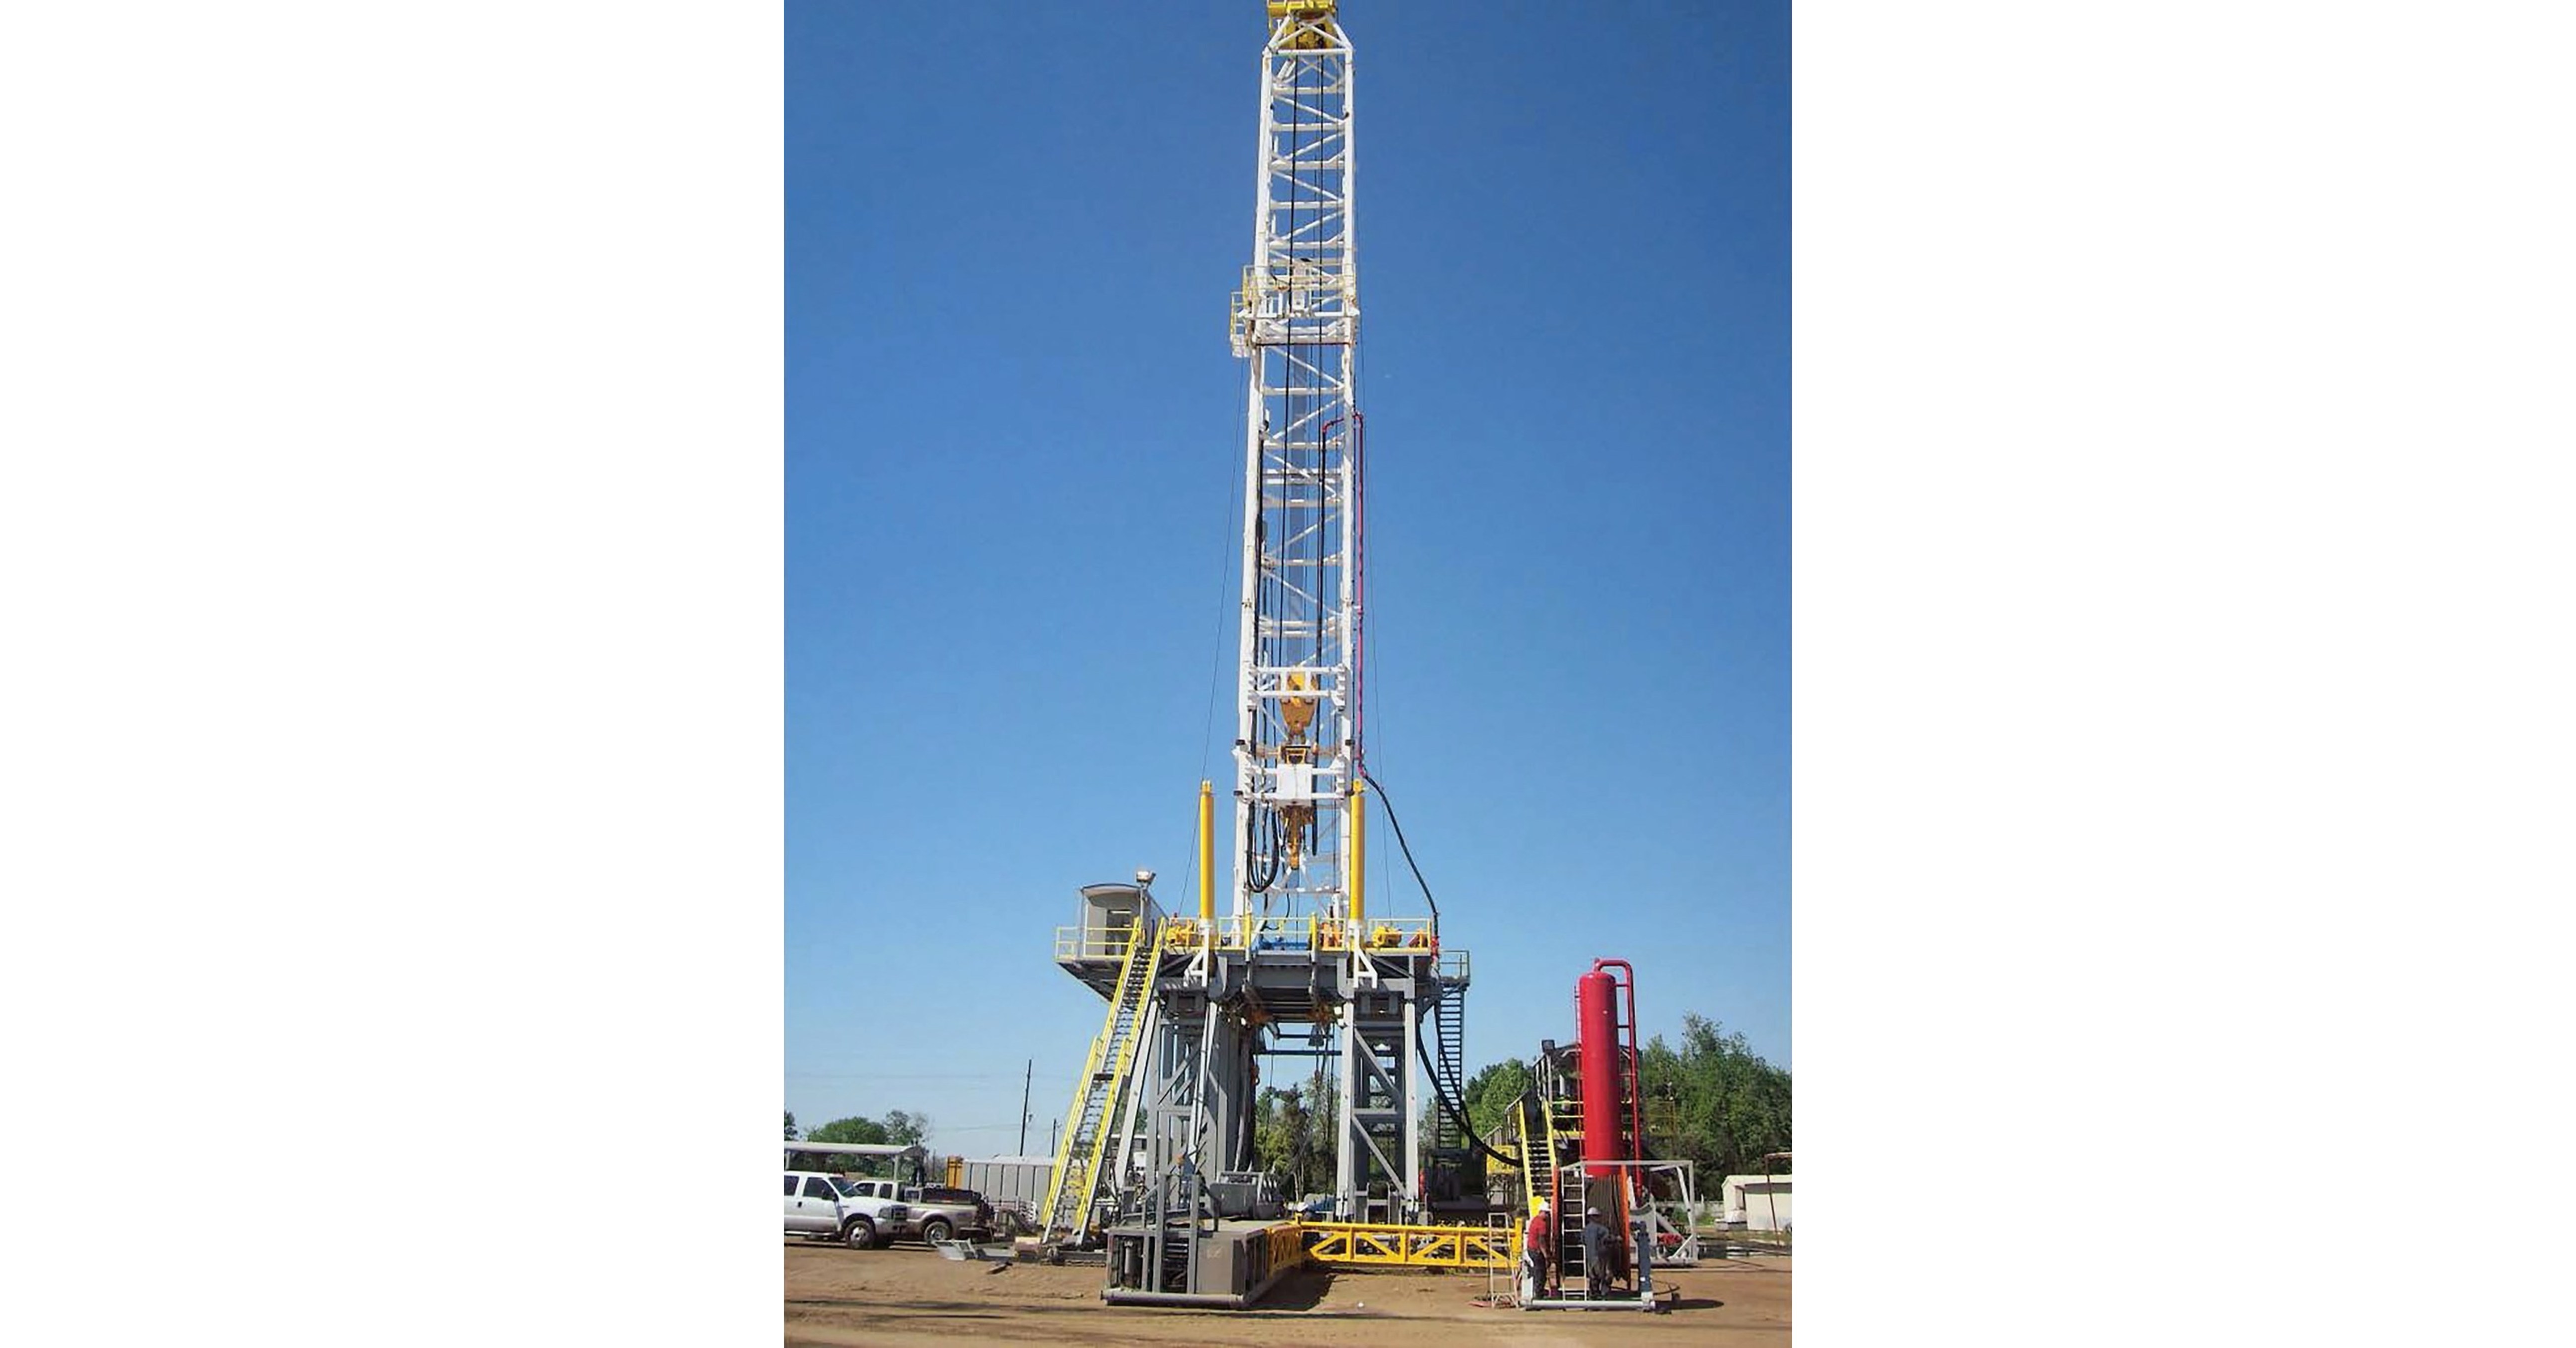 Zj 70 And Zj 90 Oil Drilling Rig(2000 Hp And Hp3000 Oil Drilling Rig) - Buy 2000hp  Drilling Rig,Zj 40 Drilling Rig,Second Hand Oil Drill Rigs Product on  Alibaba.com